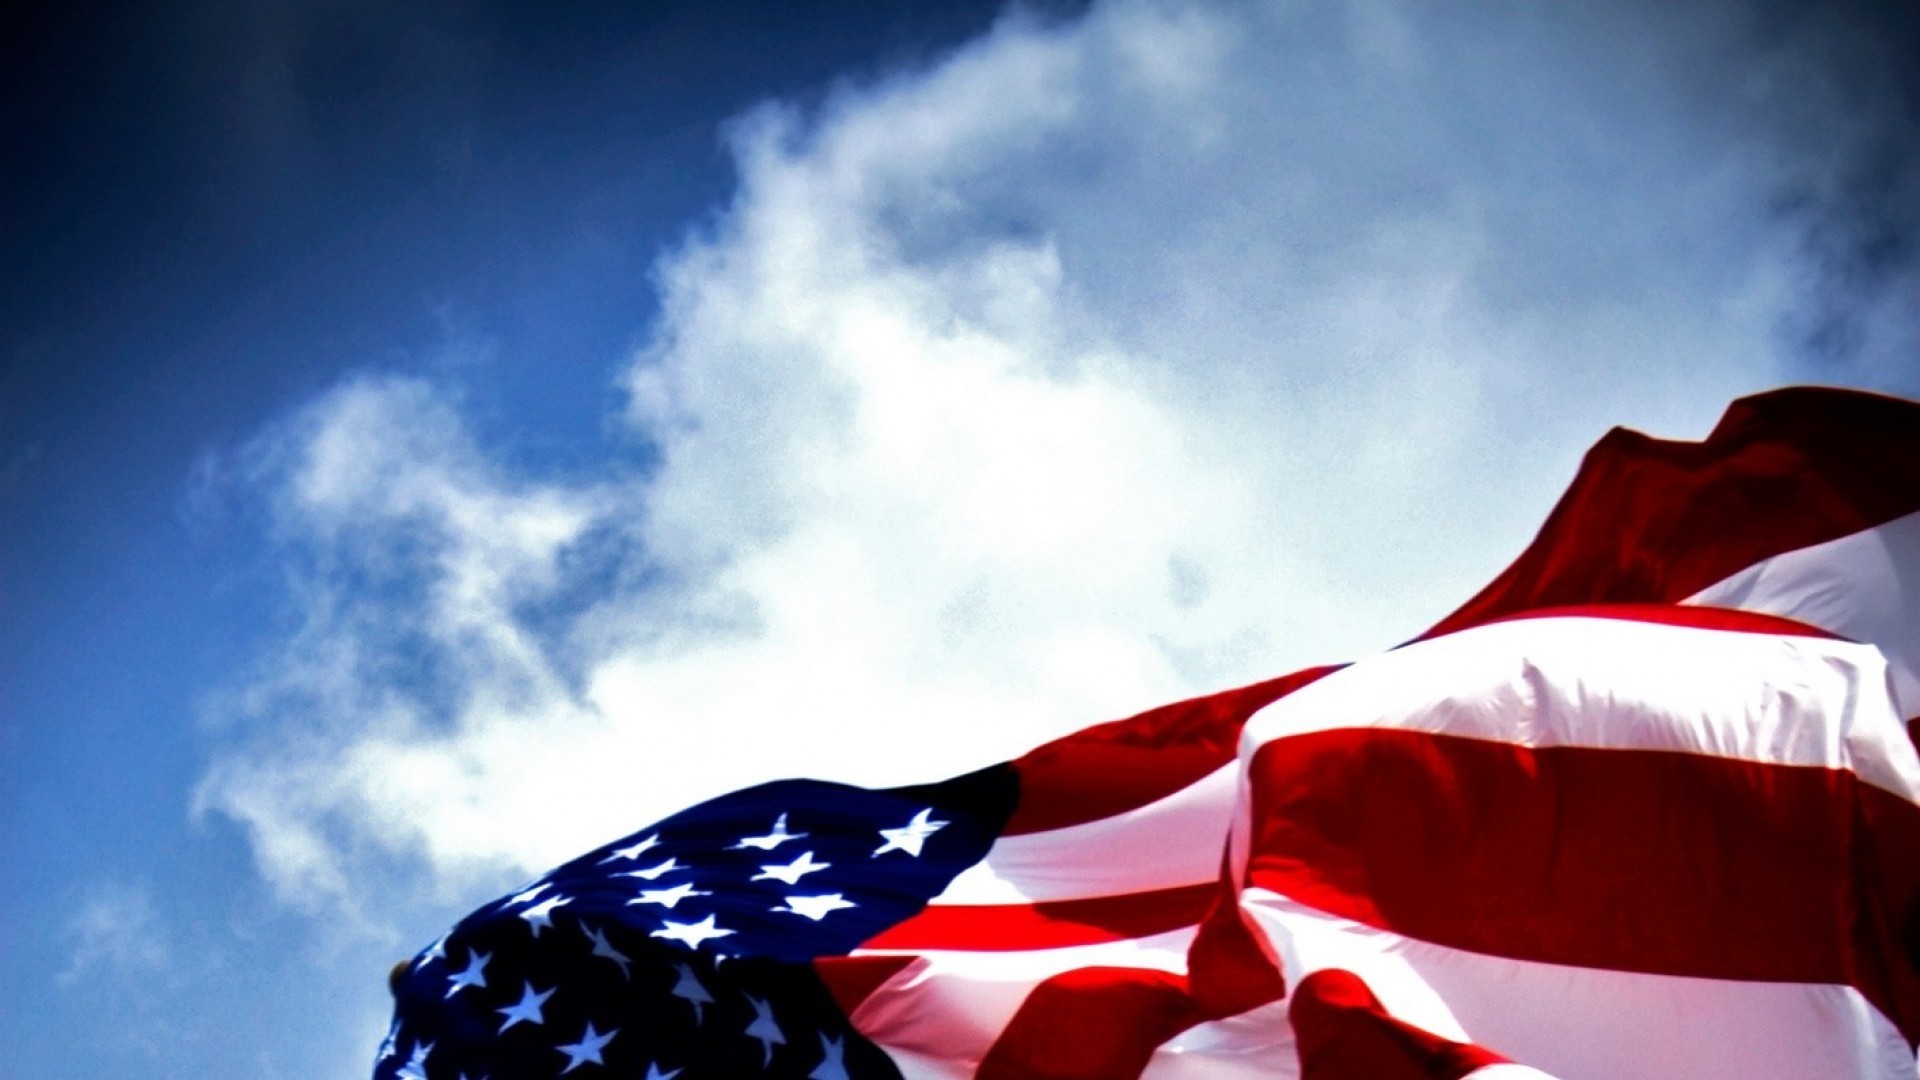 1920x1080 ... Usa Wallpapers Group With 68 Items Avec 1170373 Et British Flag  Wallpaper Hd 75 px British ...